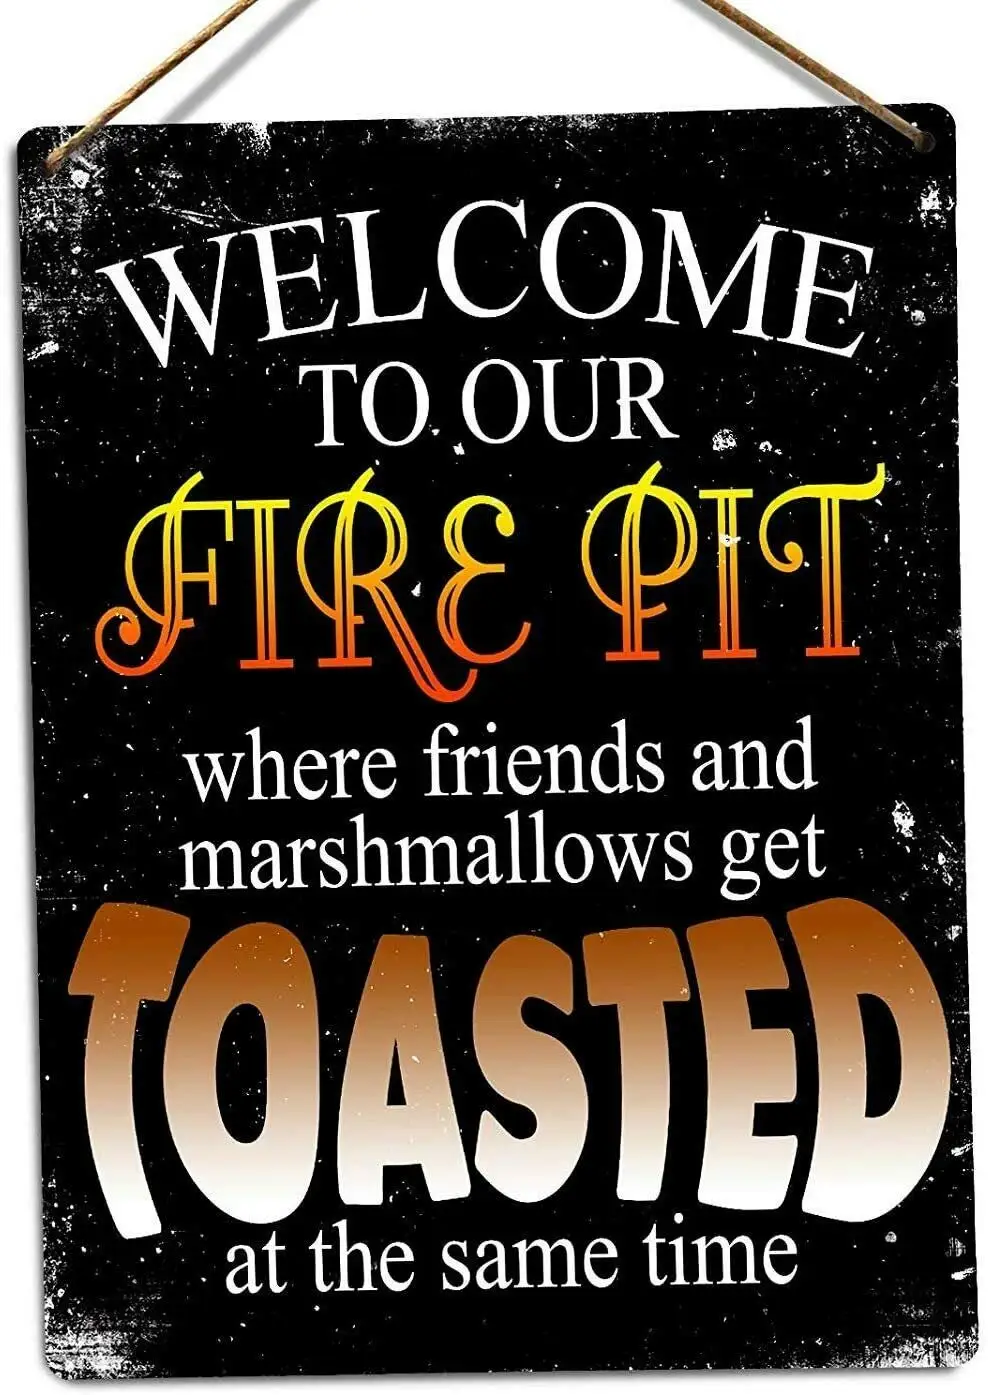 

Welcome to Our Fire Pit Metal Tin Sign Wall Plaque Retro Wall Home Bar Pub Vintage Cafe Decor, 8x12 Inch